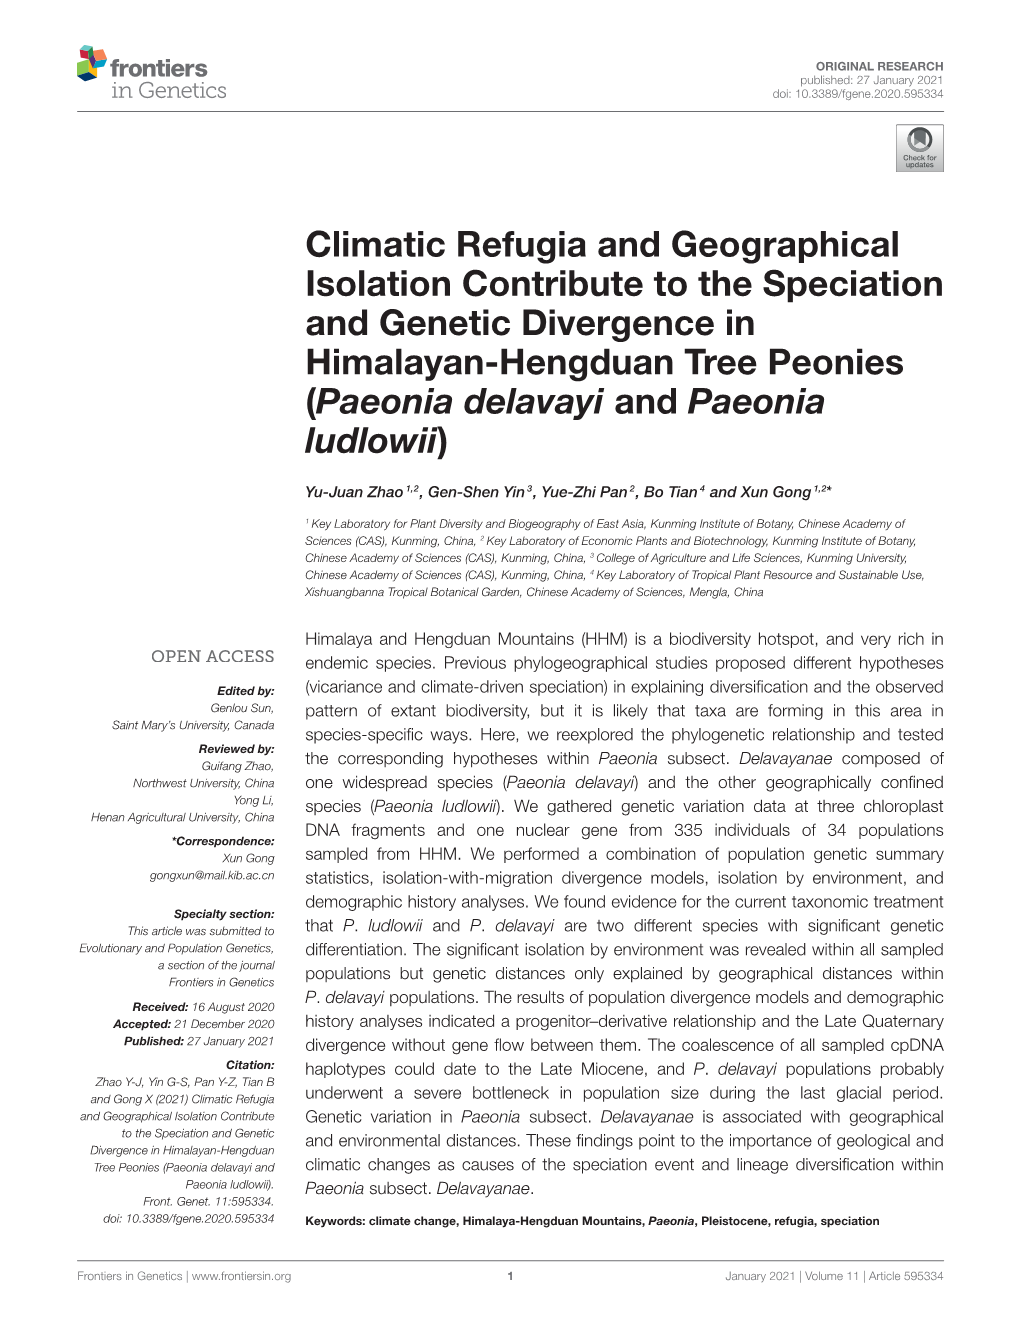 Climatic Refugia and Geographical Isolation Contribute to the Speciation and Genetic Divergence in Himalayan-Hengduan Tree Peoni